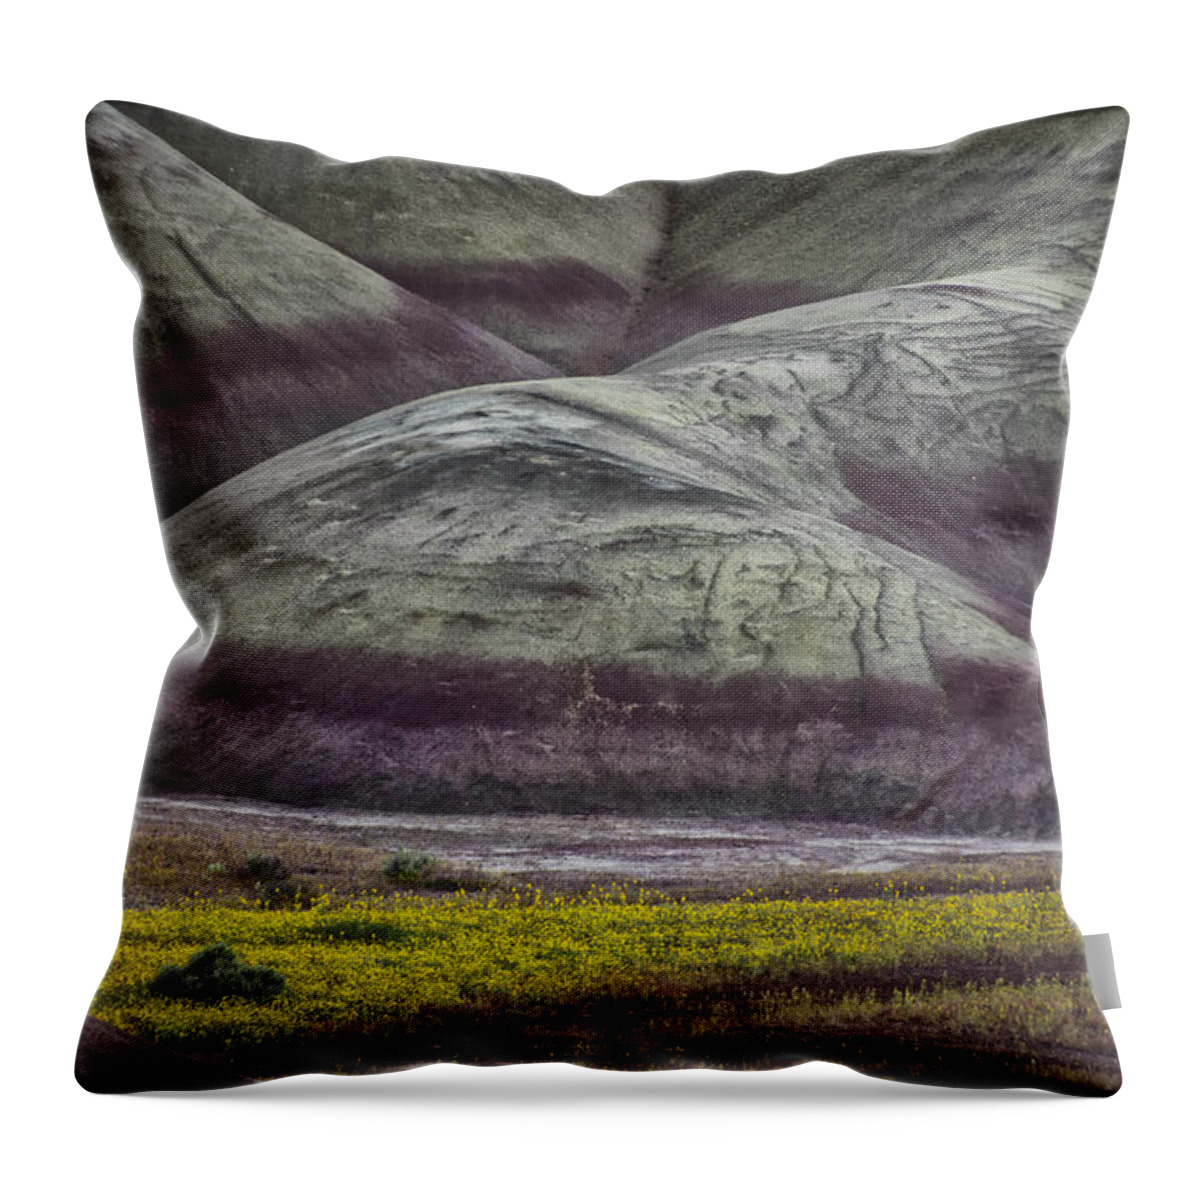 Hills Throw Pillow featuring the photograph Painted Hills Bloom by Erika Fawcett